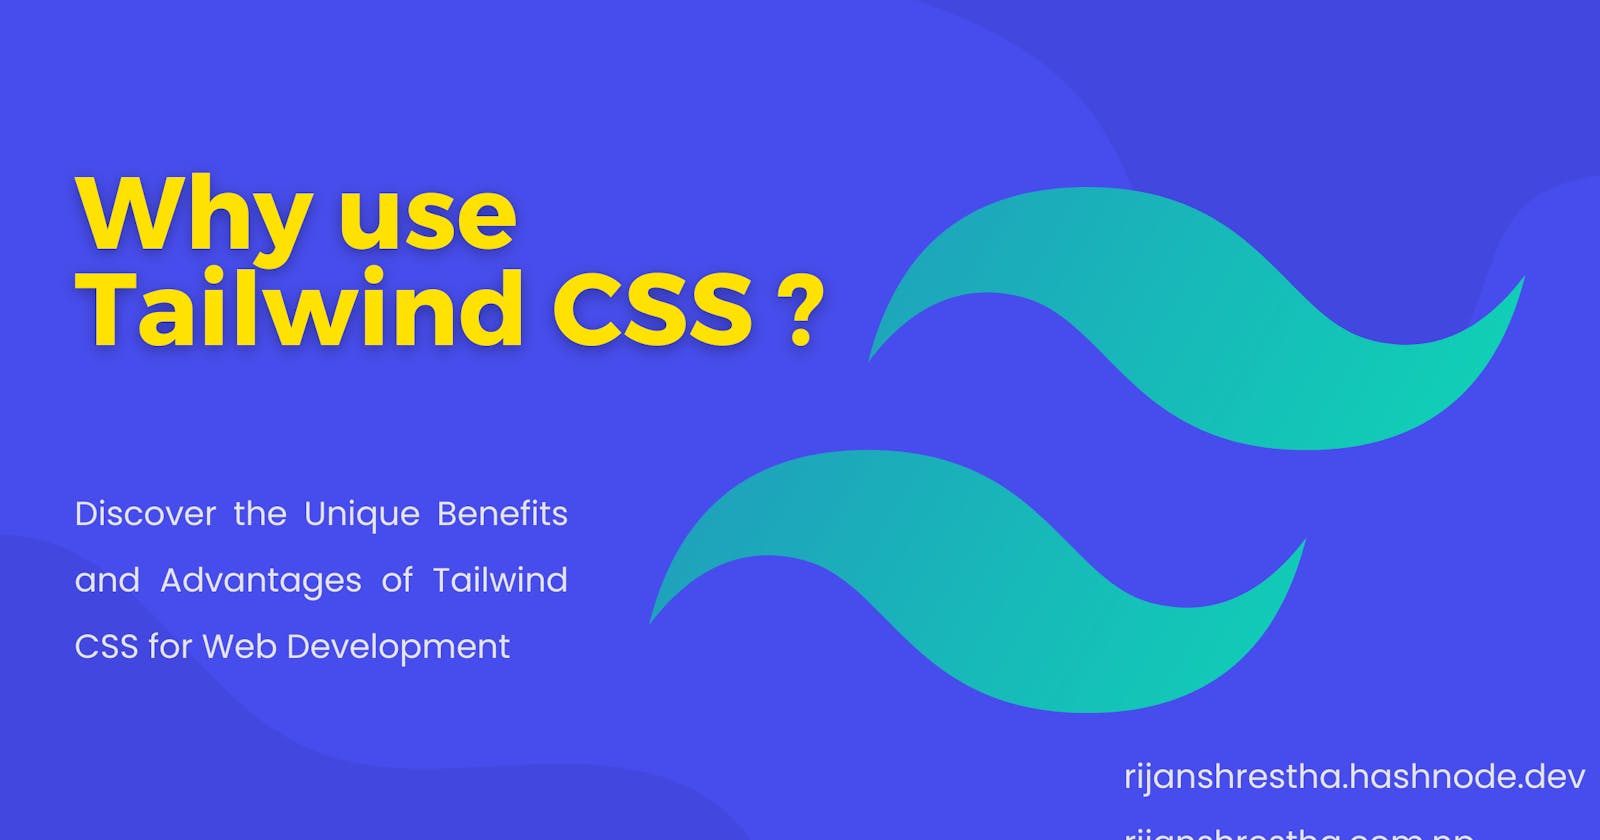 10 advantages of Tailwind CSS